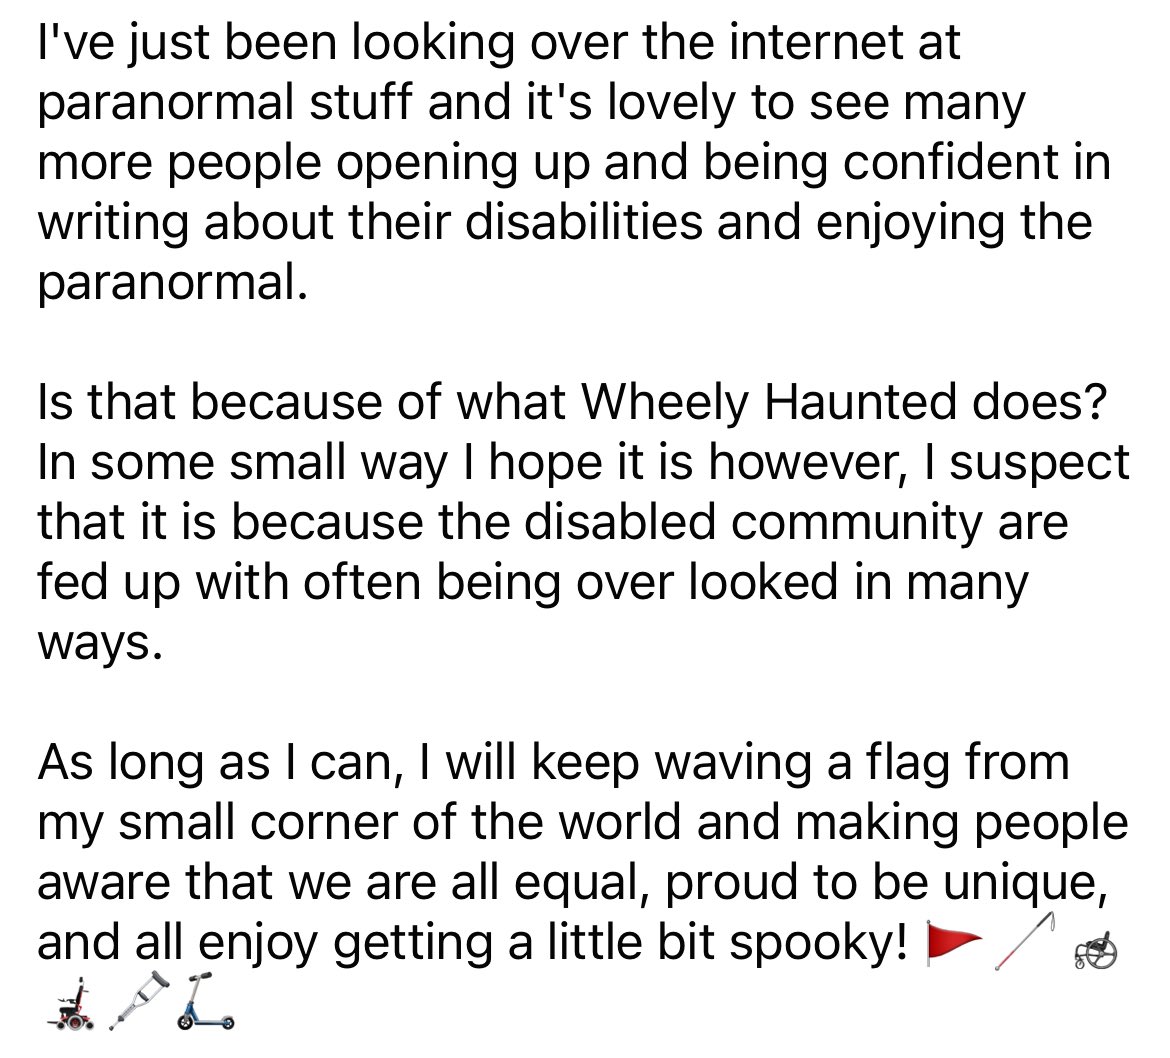 In some small way, I hope I make a difference… ❤️ #wheelyhaunted #paranormal #accessibility #disability